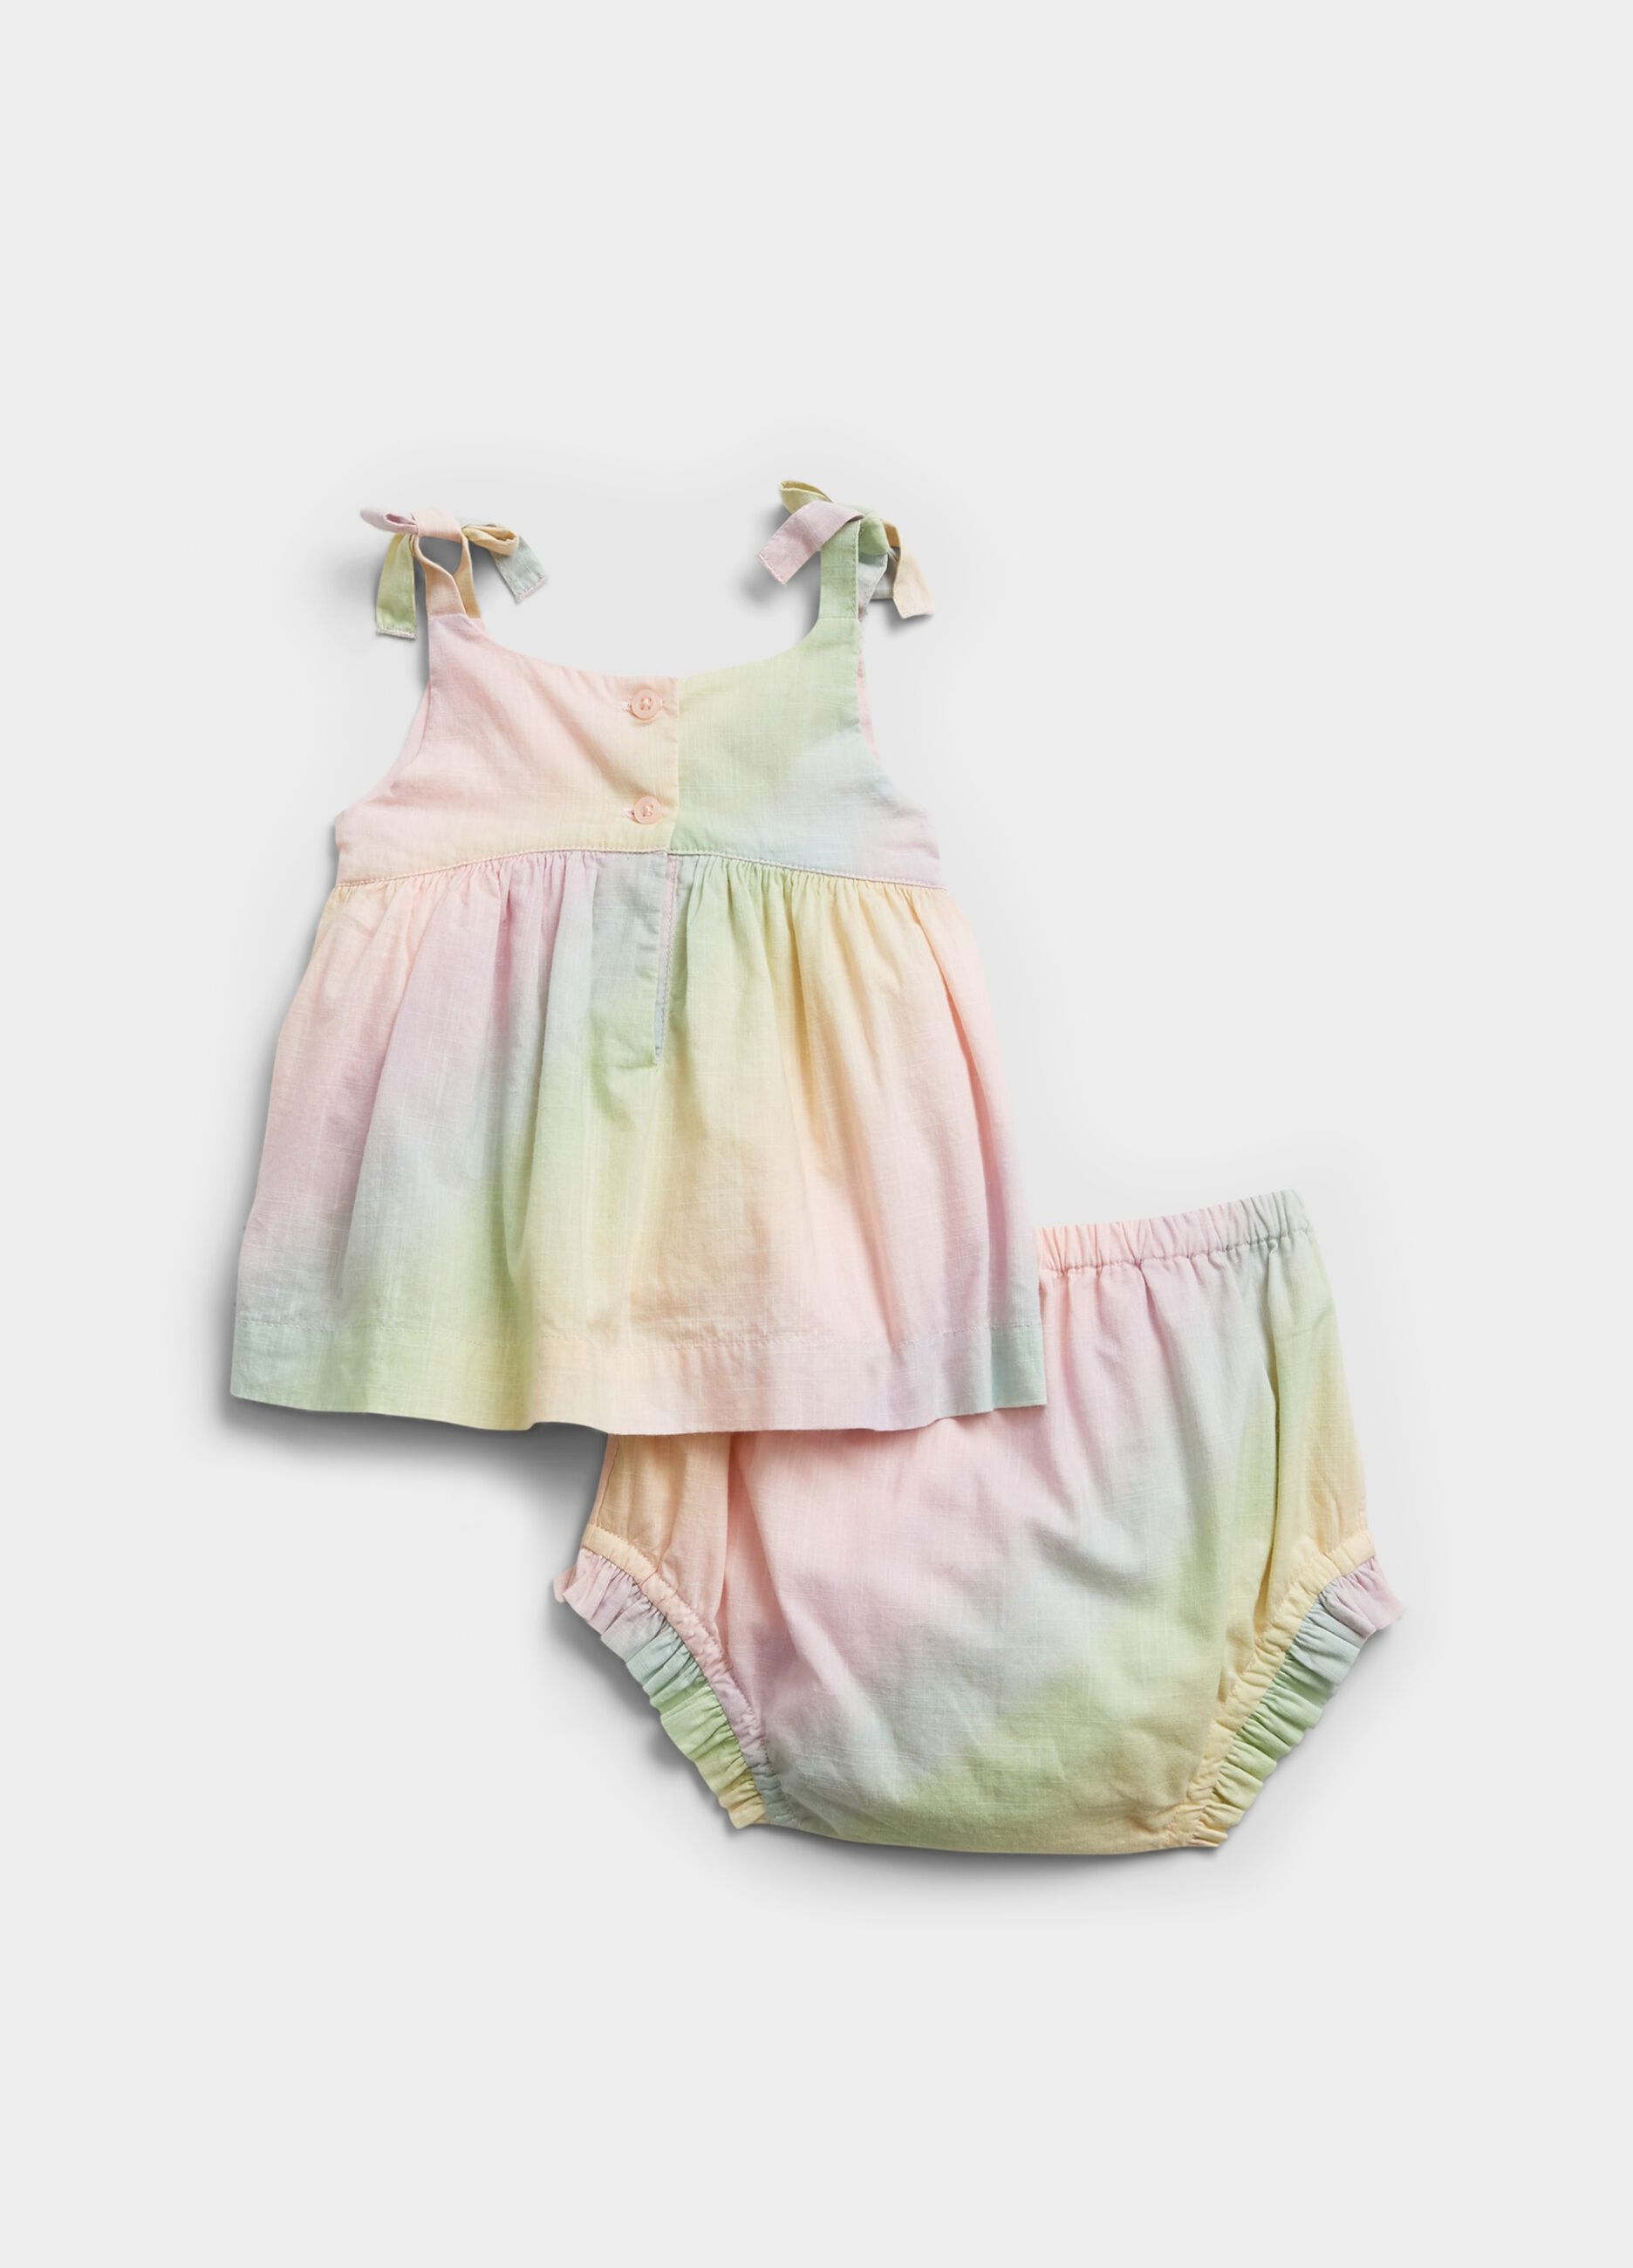 Cotton French knickers and dress set